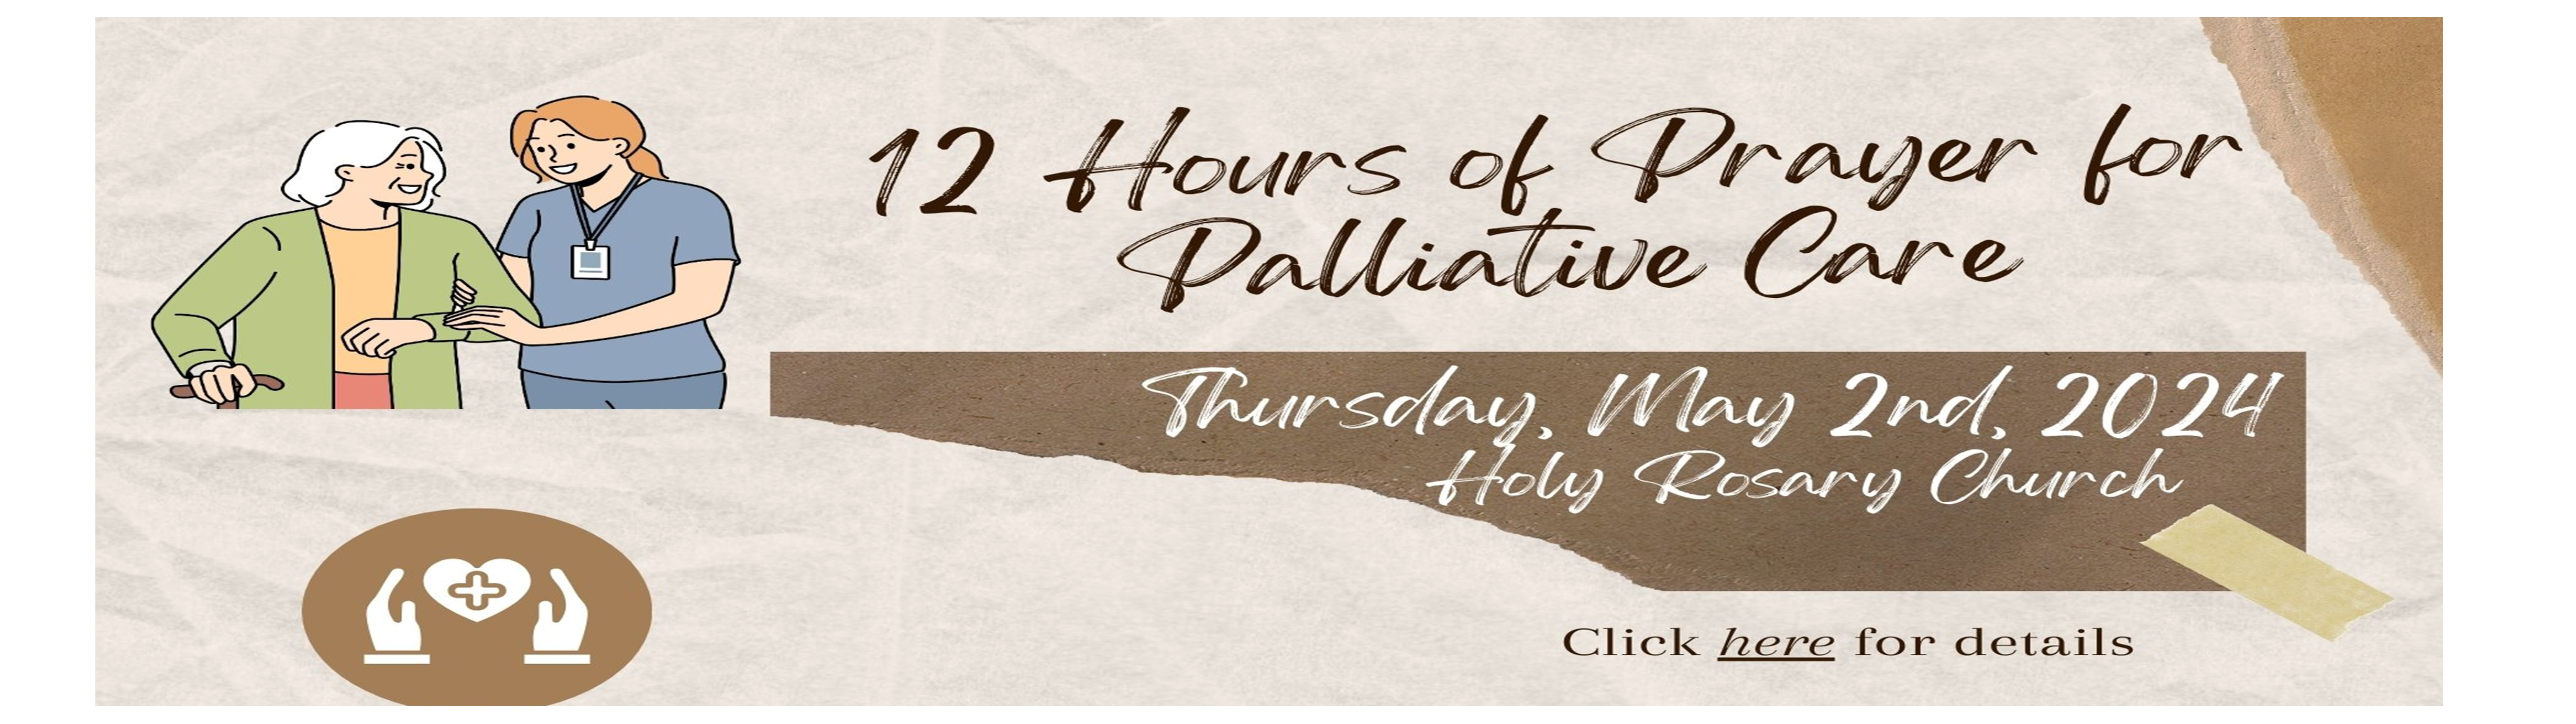 12 Hours of Prayer for Palliative Care